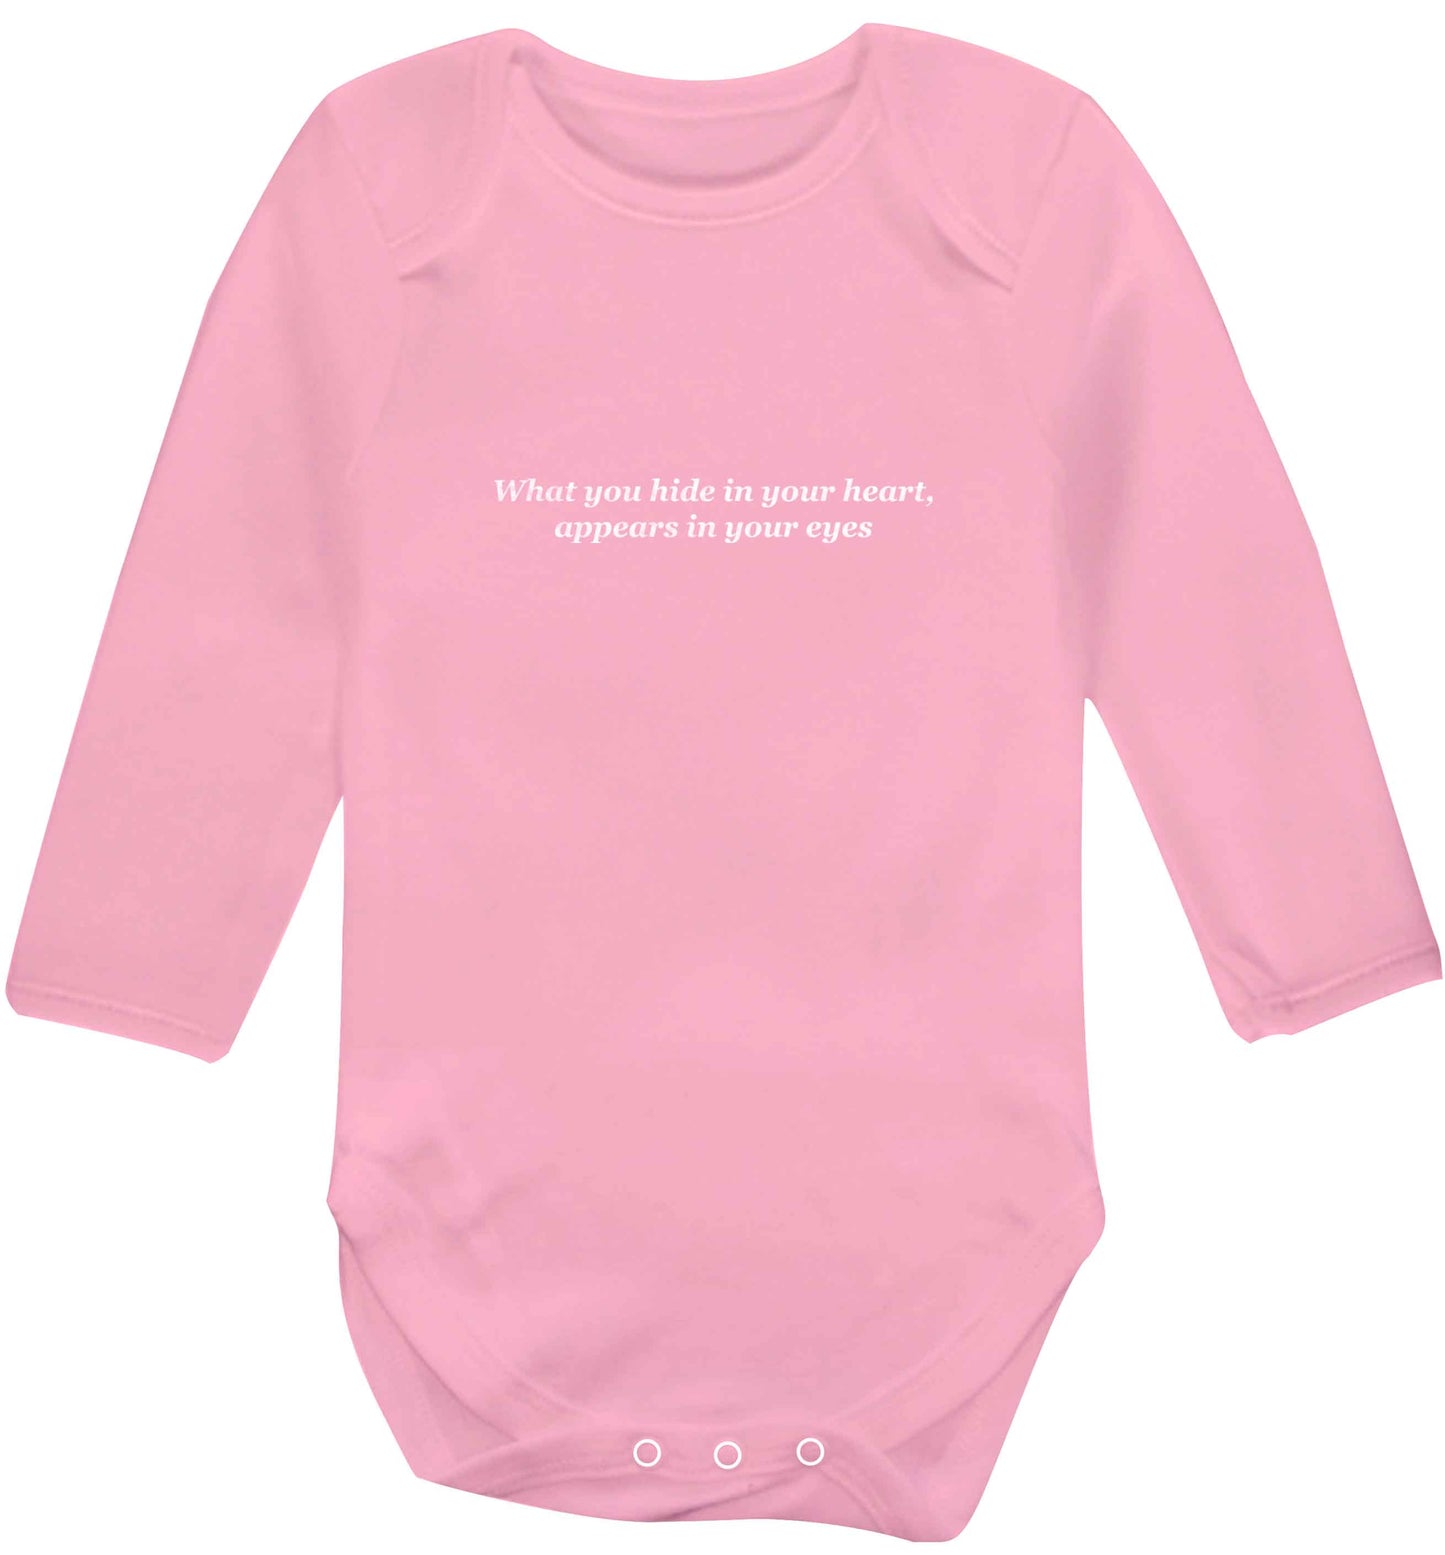 What you hide in your heart, appears in your eyes baby vest long sleeved pale pink 6-12 months